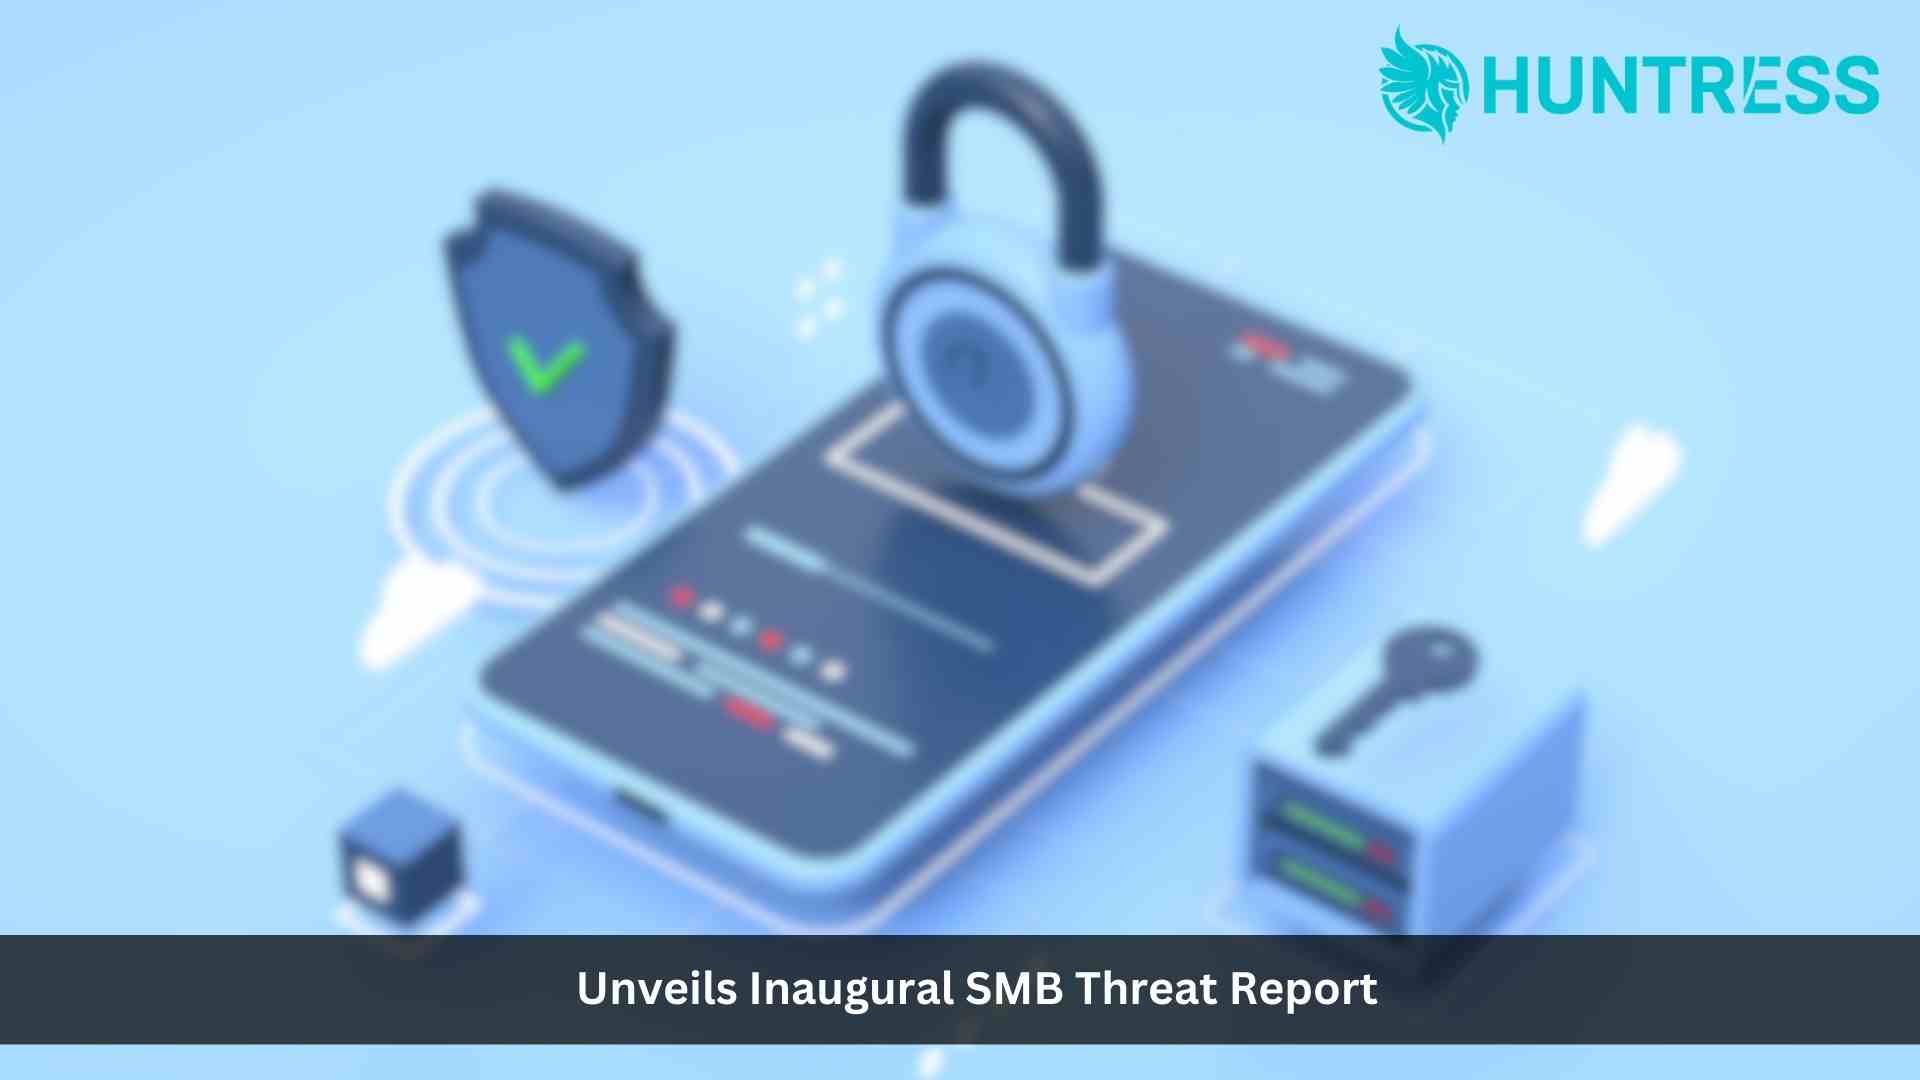 Huntress Unveils Inaugural SMB Threat Report, Observes a Large Spike in Business Email Compromise